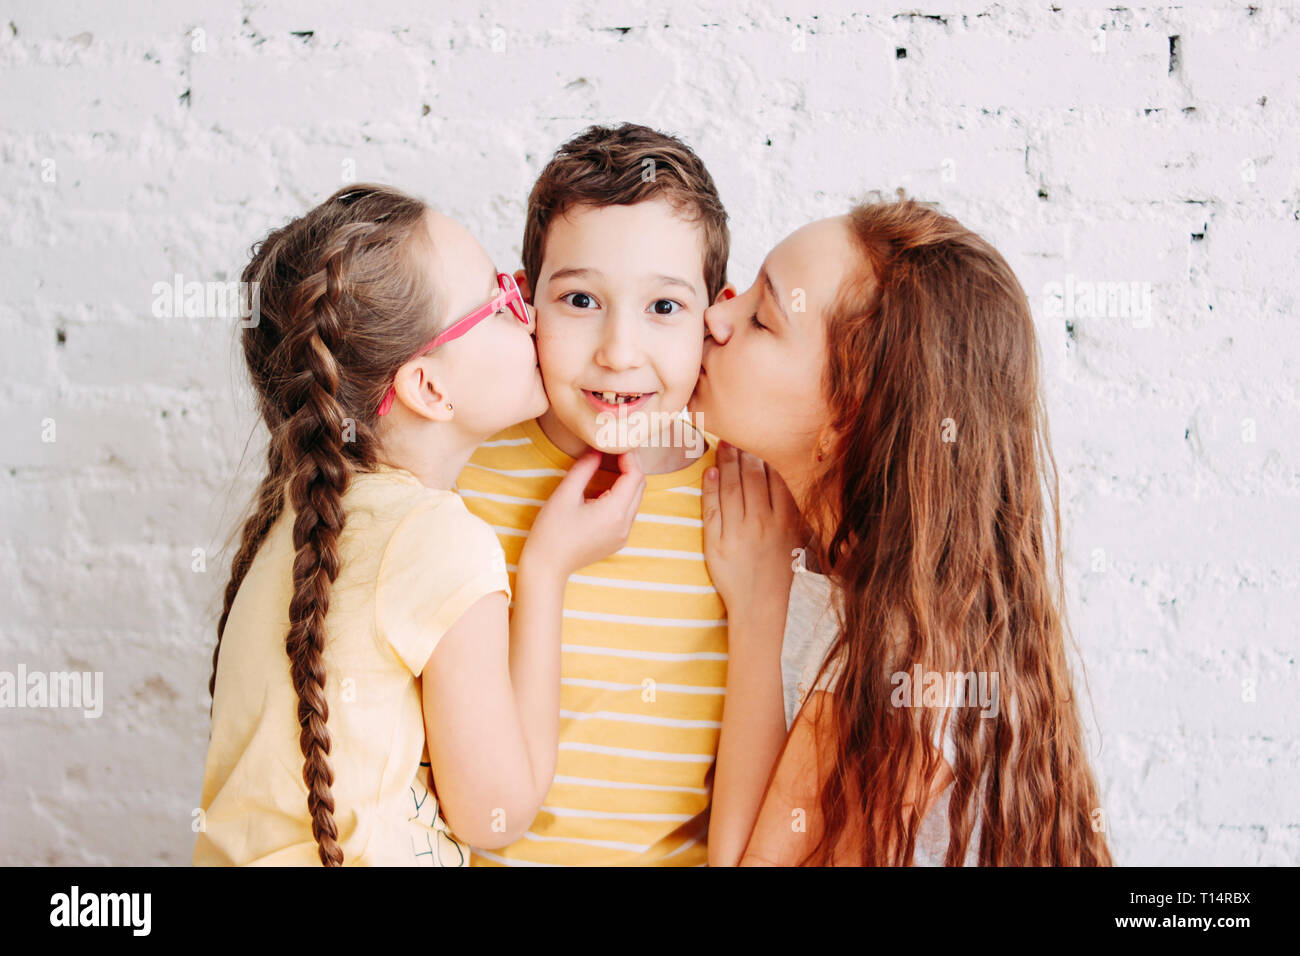 Girls sisters kissing boy brother with two sides isolated on white brick background Stock Photo